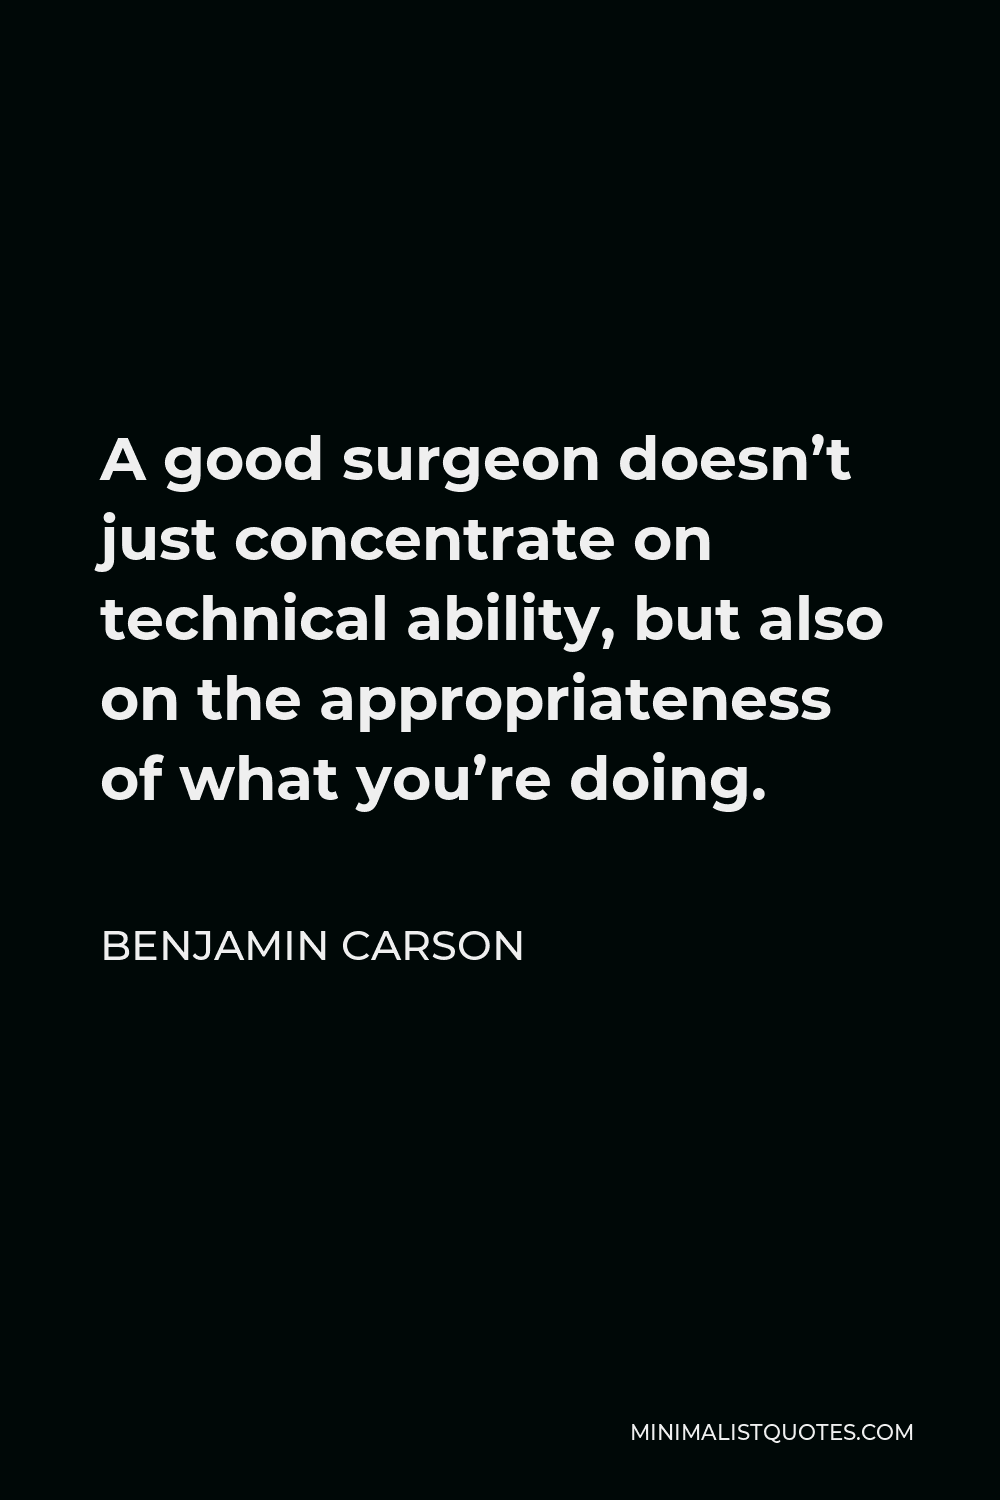 Benjamin Carson Quote - A good surgeon doesn’t just concentrate on technical ability, but also on the appropriateness of what you’re doing.